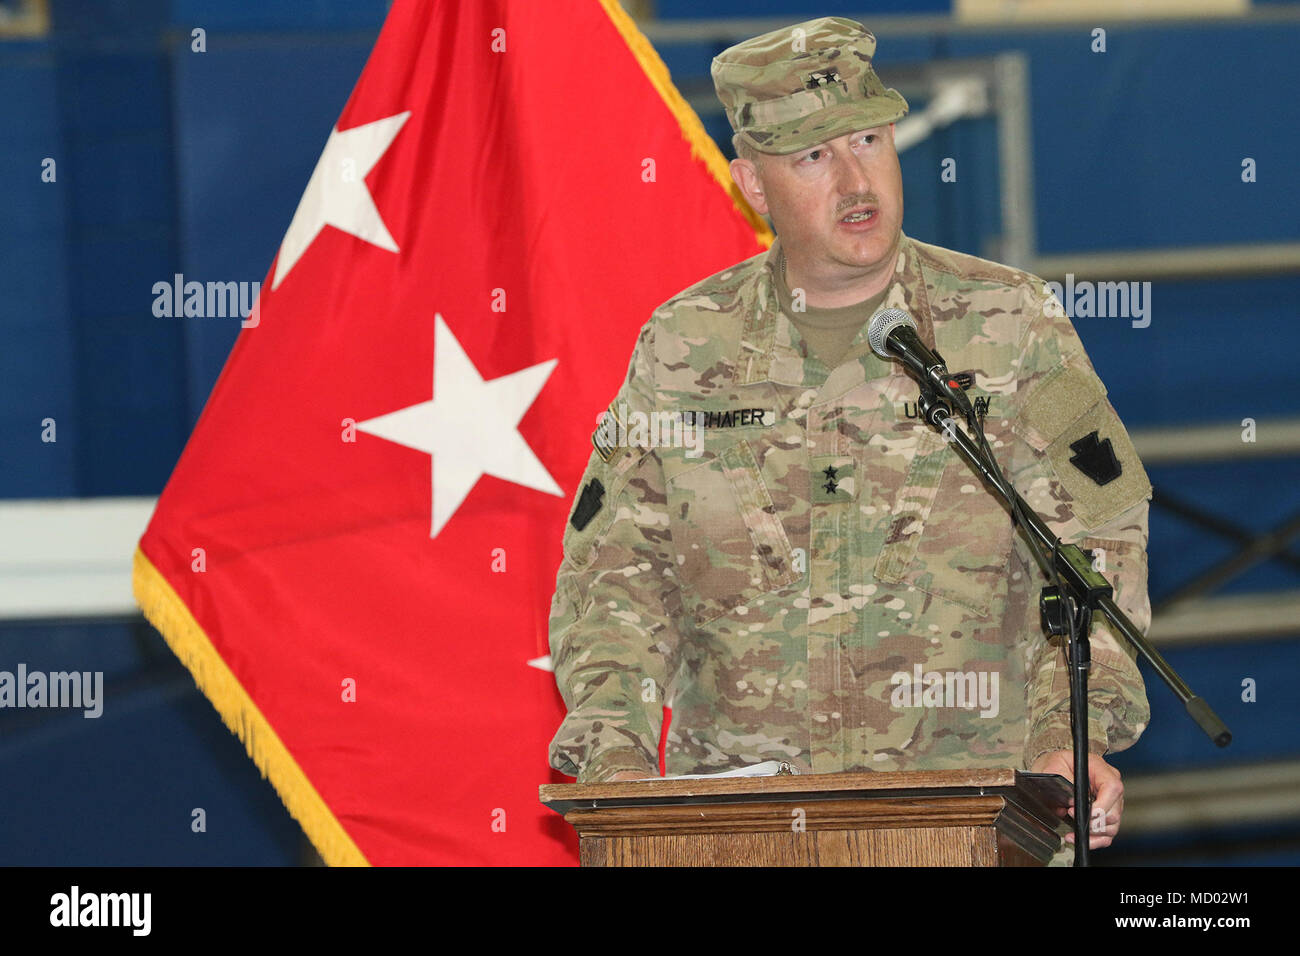 CAMP ARIFJAN, Kuwait – Maj. Gen. Andrew Schafer, 28th Infantry Division commanding general, explains the division’s role in Task Force Spartan during a transfer of authority ceremony March 8, 2018. The Pennsylvania Army National Guard unit’s headquarters and headquarters battalion assumed responsibility from its counterpart, the 35th Infantry Division which is comprised of soldiers from the Missouri and Kansas National Guard. The 28th’s HHBN will serve as a division headquarters for roughly 10,000 soldiers conducting theater security operations in the Middle East. (U.S. Army photo by Sgt. 1st  Stock Photo